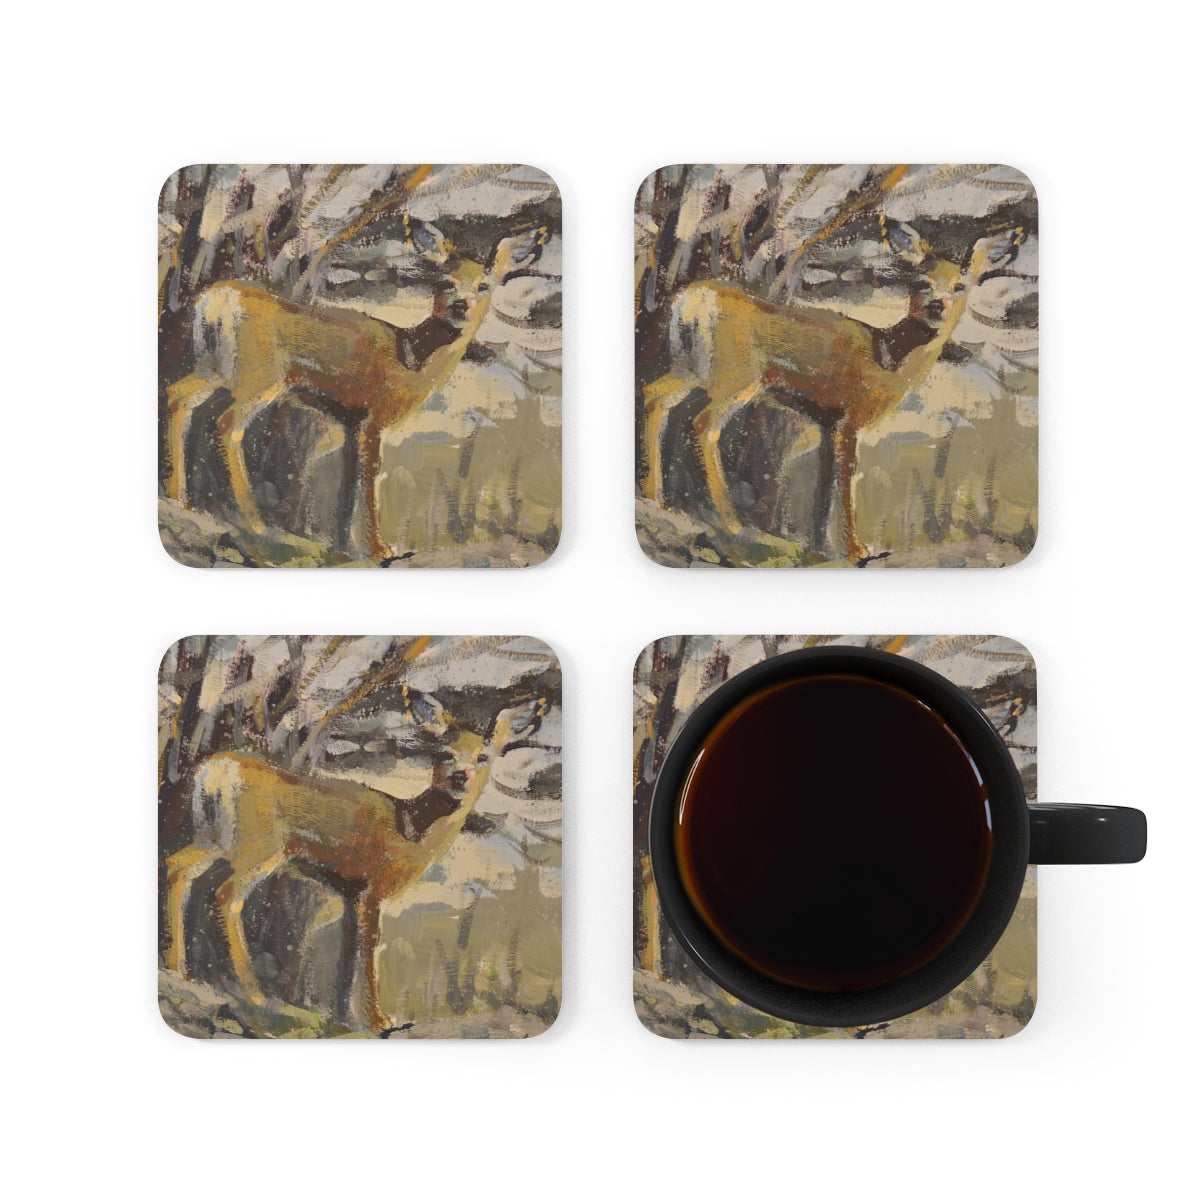 "Such a Deer", by Kristina Sellers, Corkwood Coaster Set